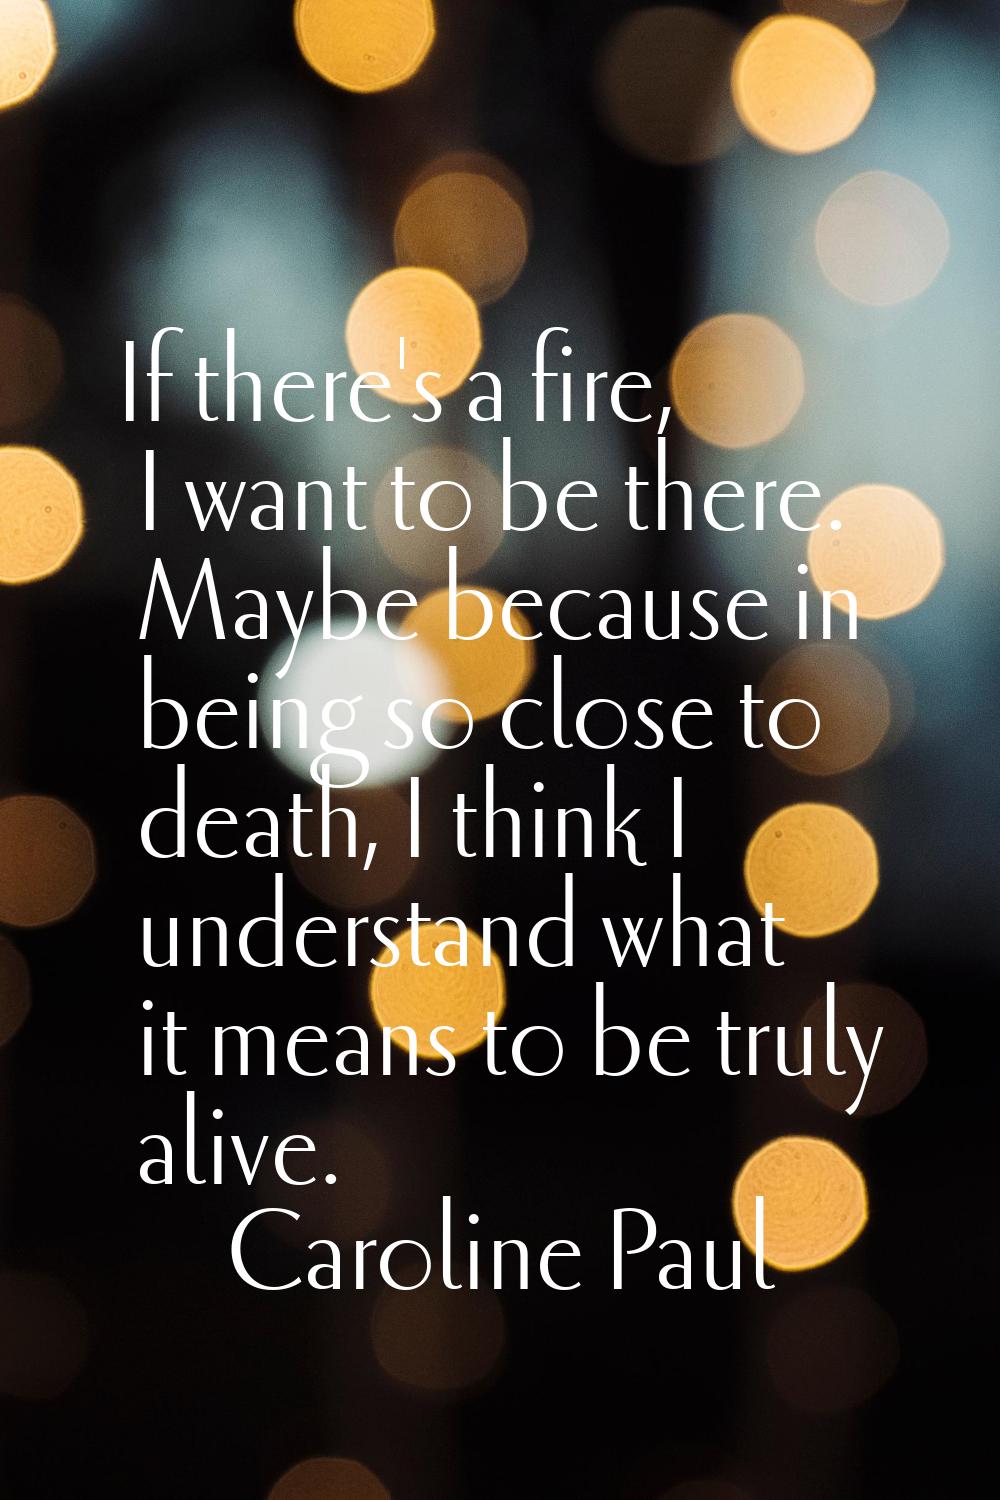 If there's a fire, I want to be there. Maybe because in being so close to death, I think I understa